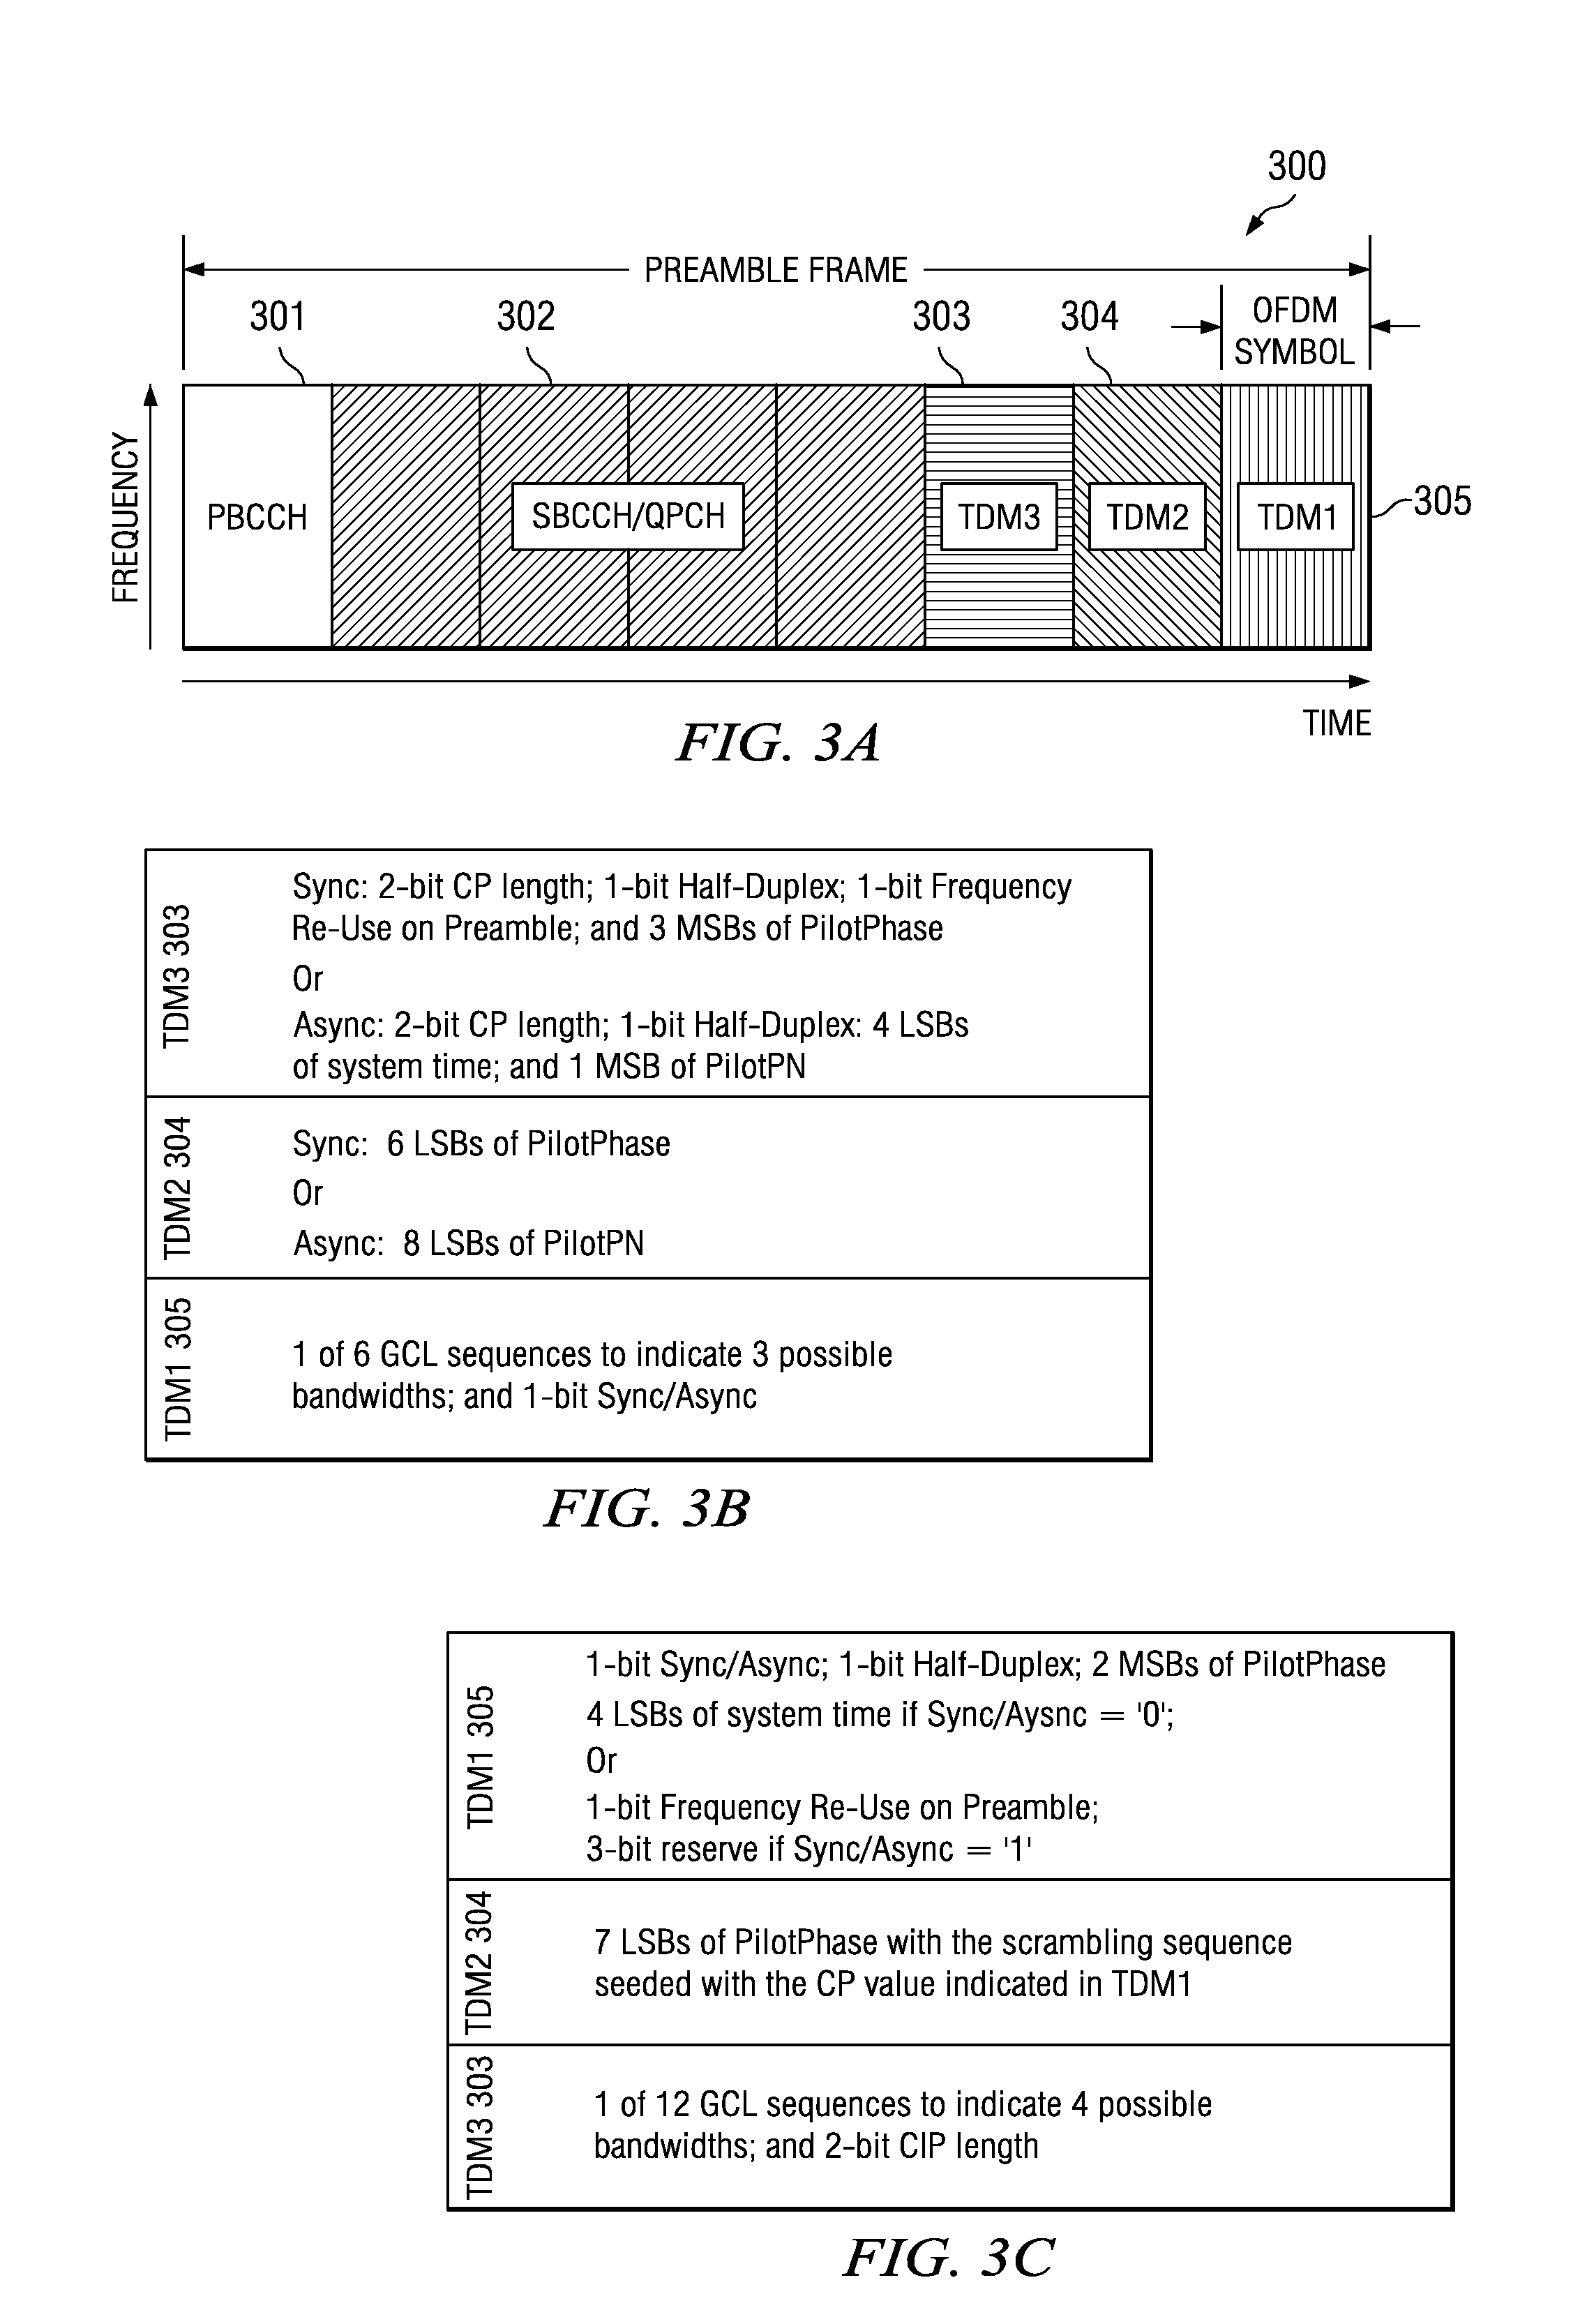 Method and Apparatus for Achieving System Acquisition and Other Signaling Purposes Using the Preamble in an OFDM Based Communications System